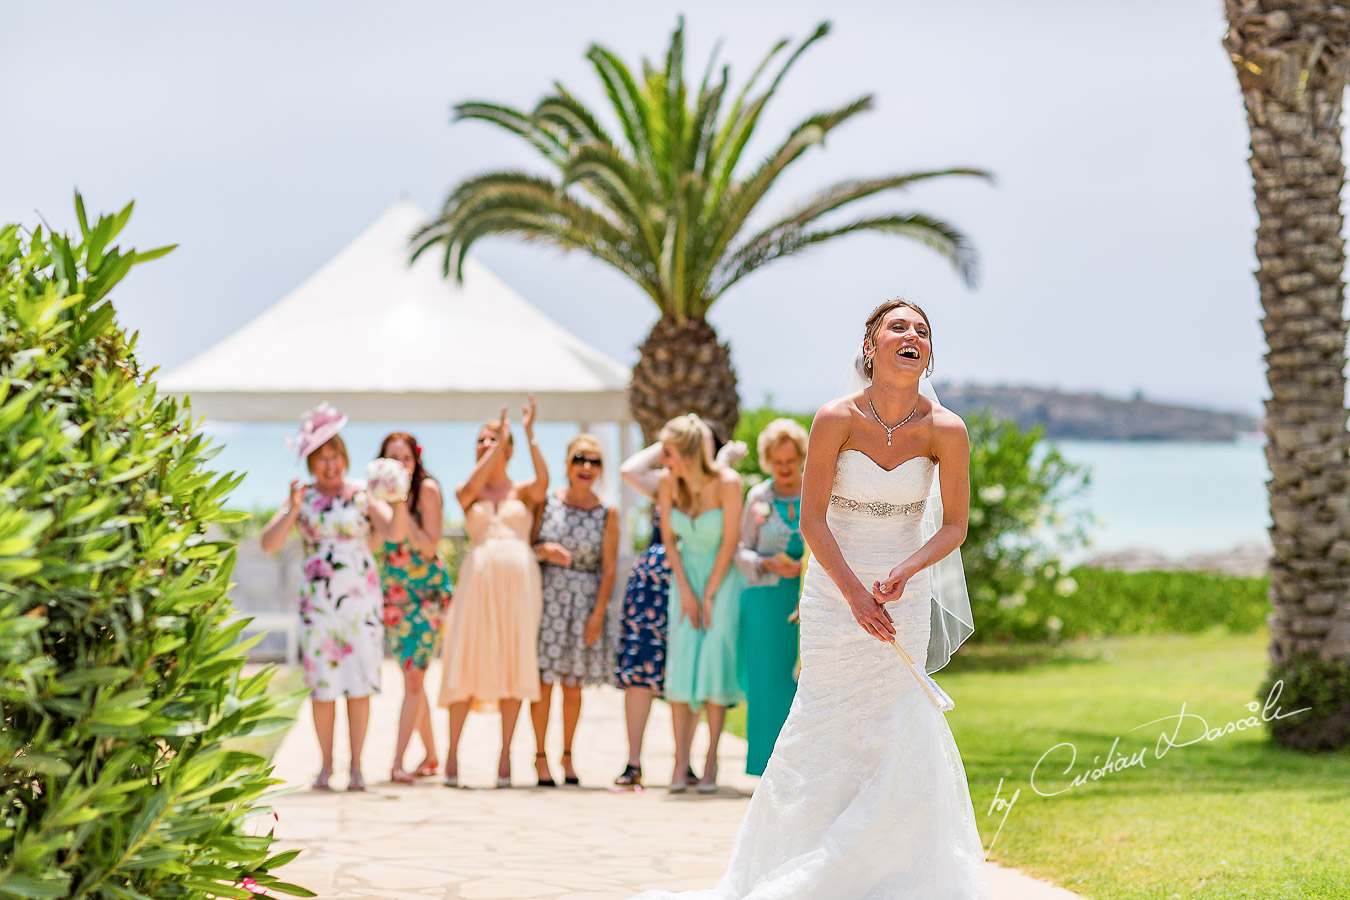 Alicia tossing the bouquet, moment photographed at Nissi Beach Resort in Ayia Napa, Cyprus by Cristian Dascalu.